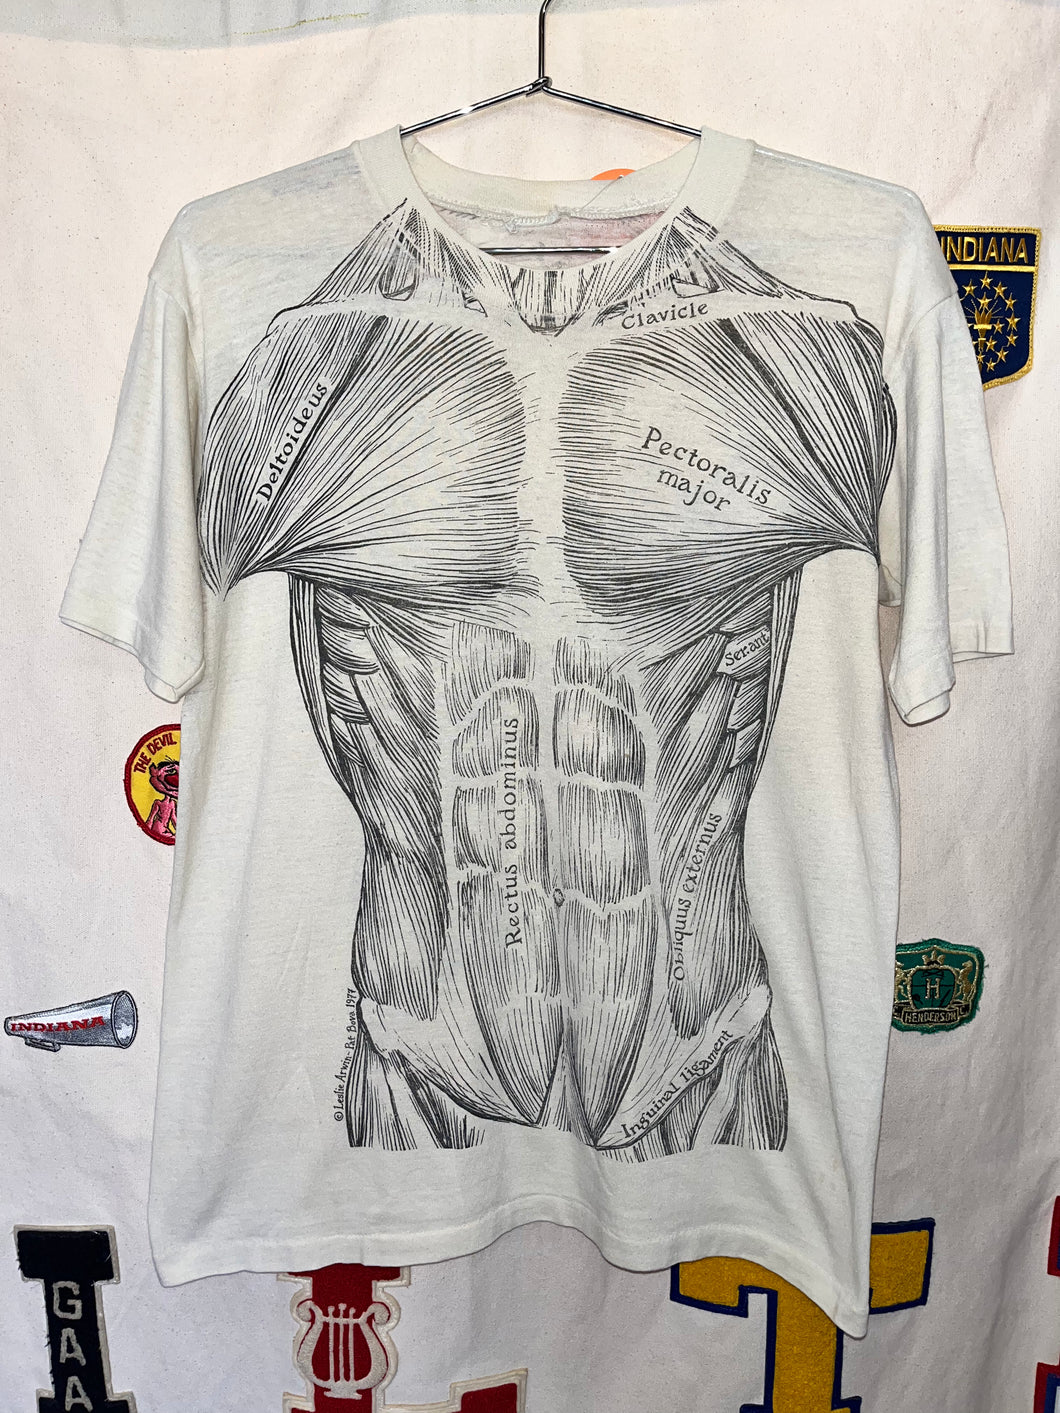 Vintage Muscle Anatomy All Over Print Leslie Arwin Pat Bova 1997 T-Shirt: Large